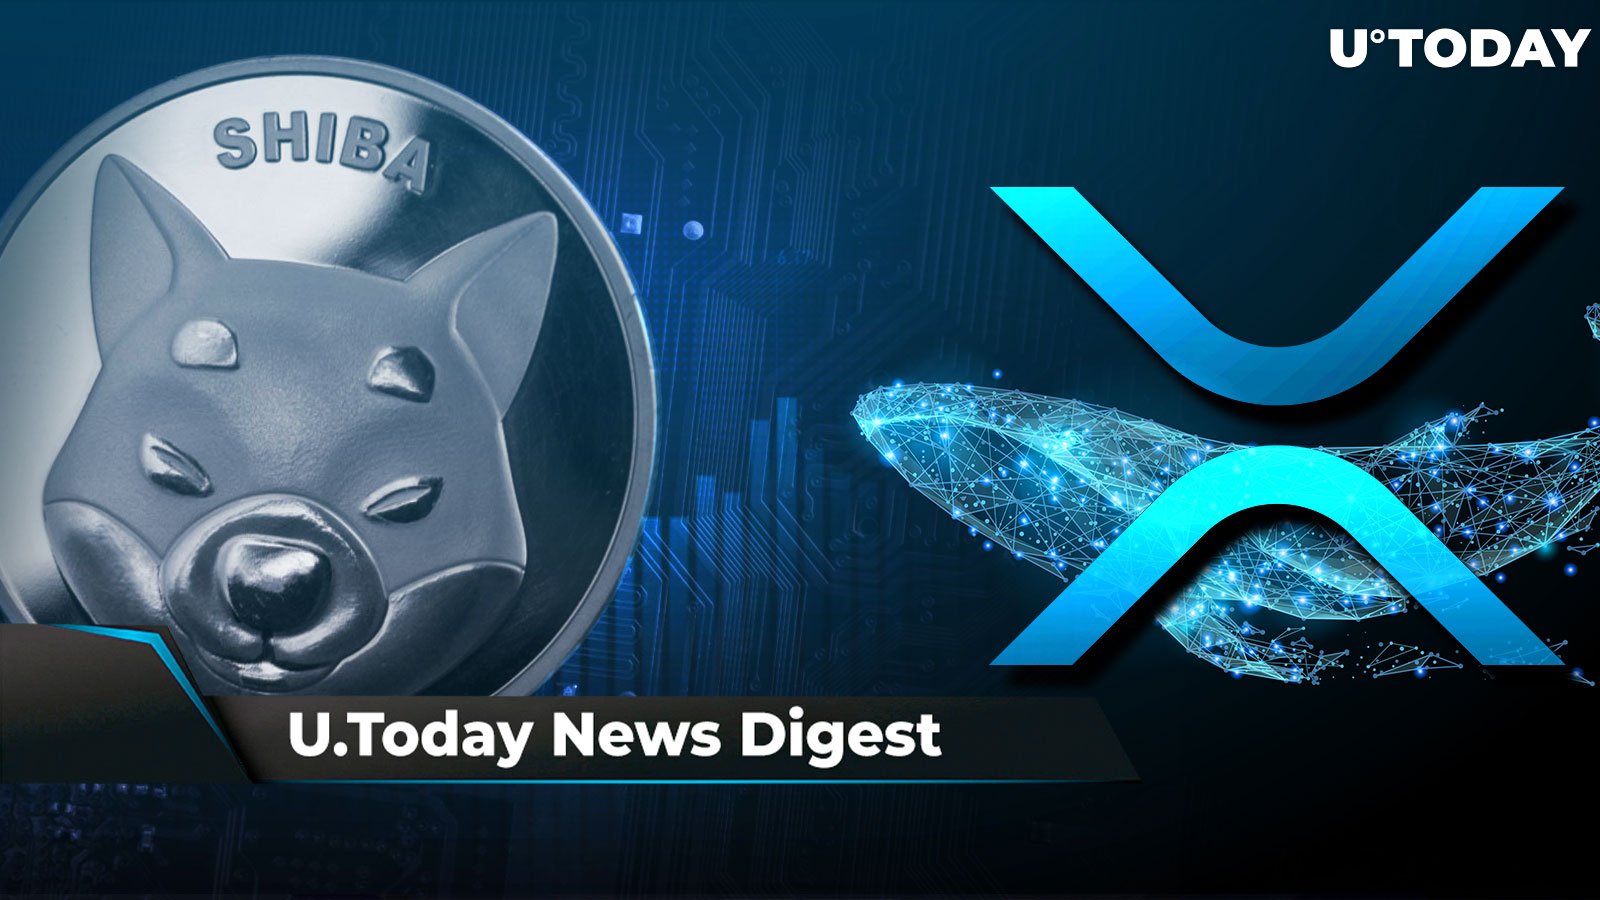 SHIB Takes over Dubai with Welly Burger Joint, XRP Soars, Whales Move 336 Million XRP, If SHIB Hits $0.01, David Gokhshtein Might Do This: Crypto News Digest by U.Today